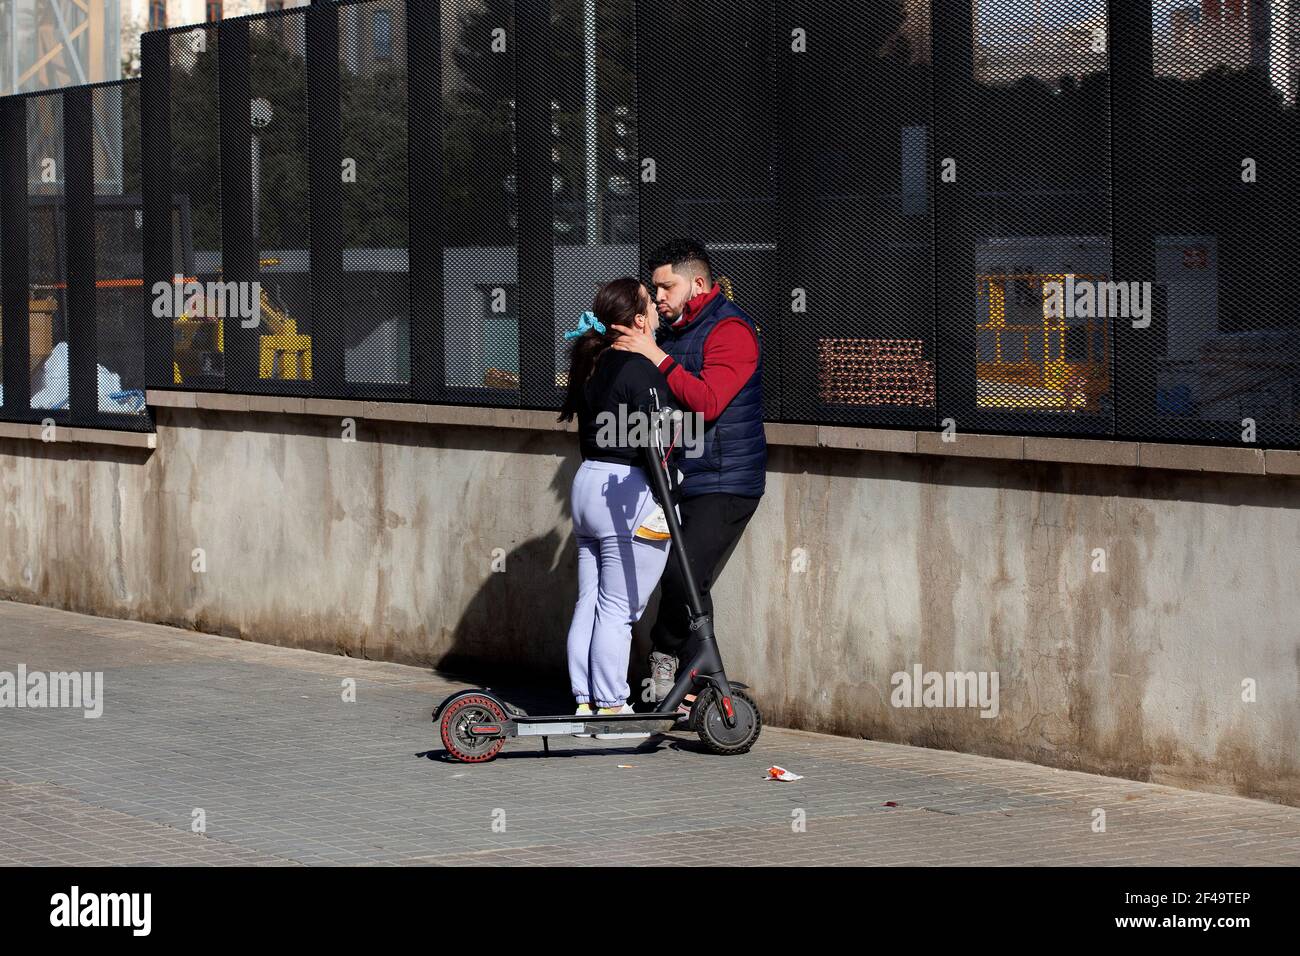 Couple kissing in the street, Barcelona, Spain. Stock Photo